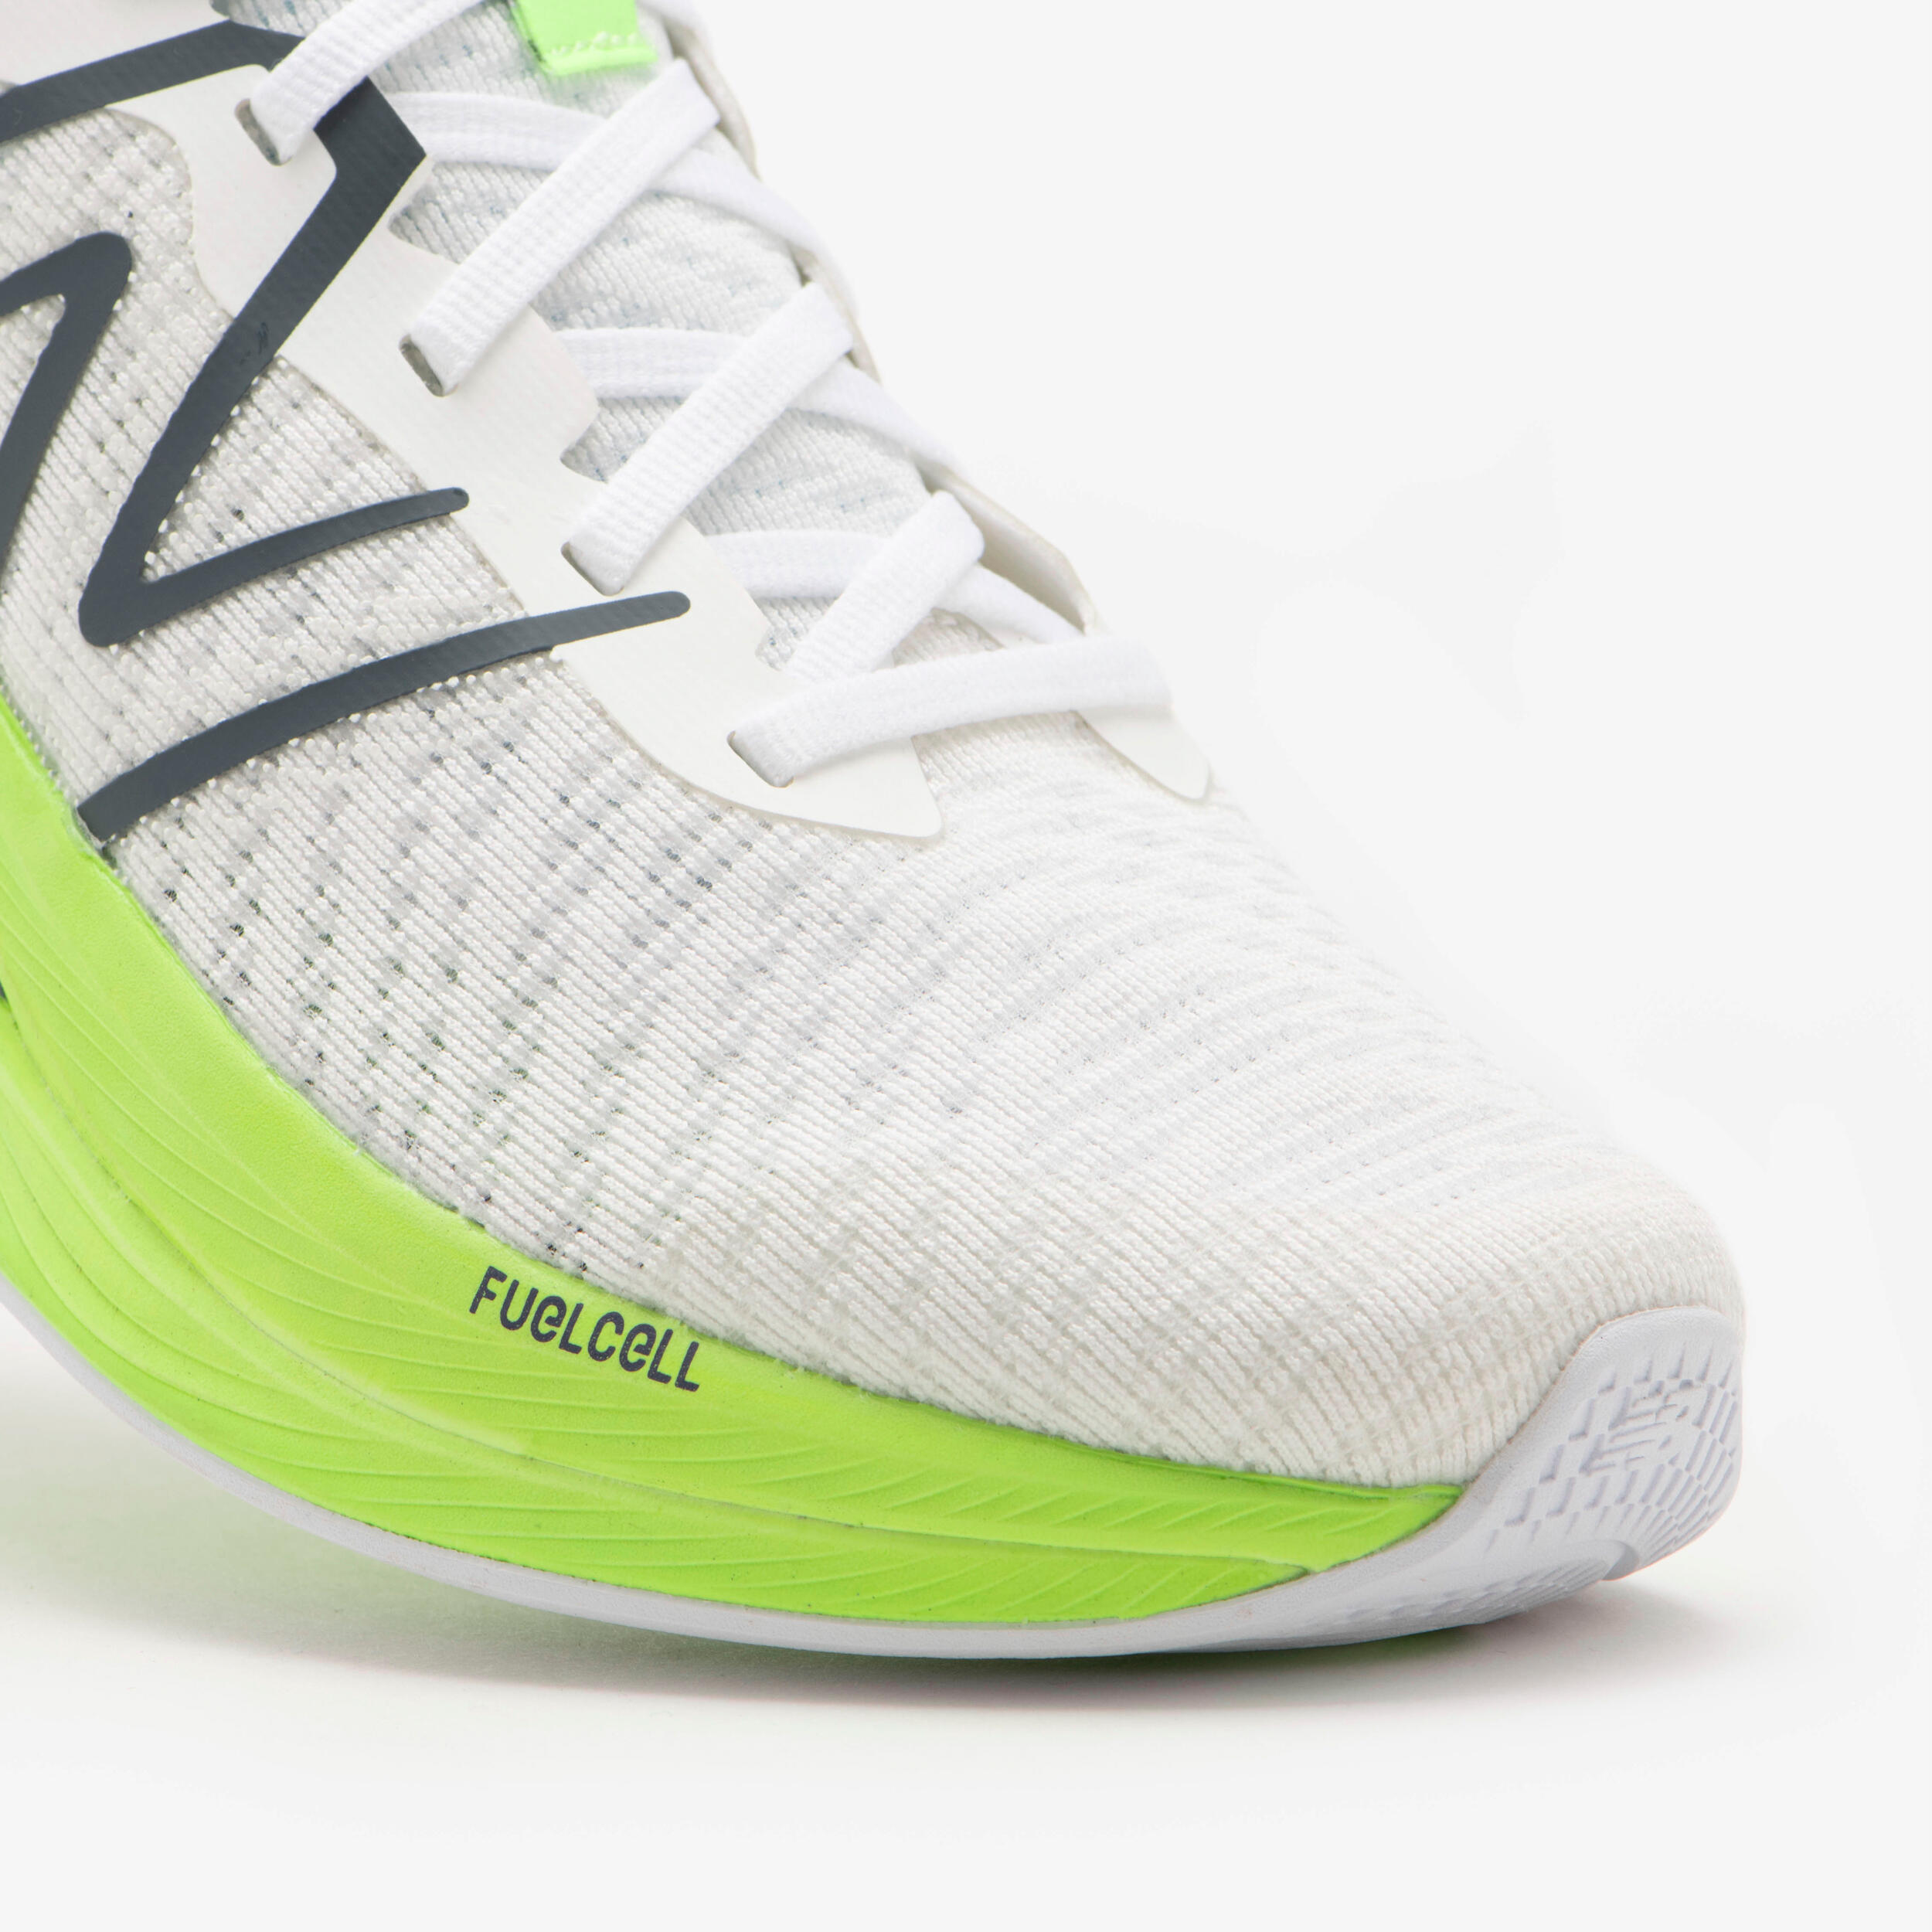 WOMEN'S NEW BALANCE FUELCELL PROPEL V4 RUNNING SHOES - WHITE AND NEON GREEN 6/7